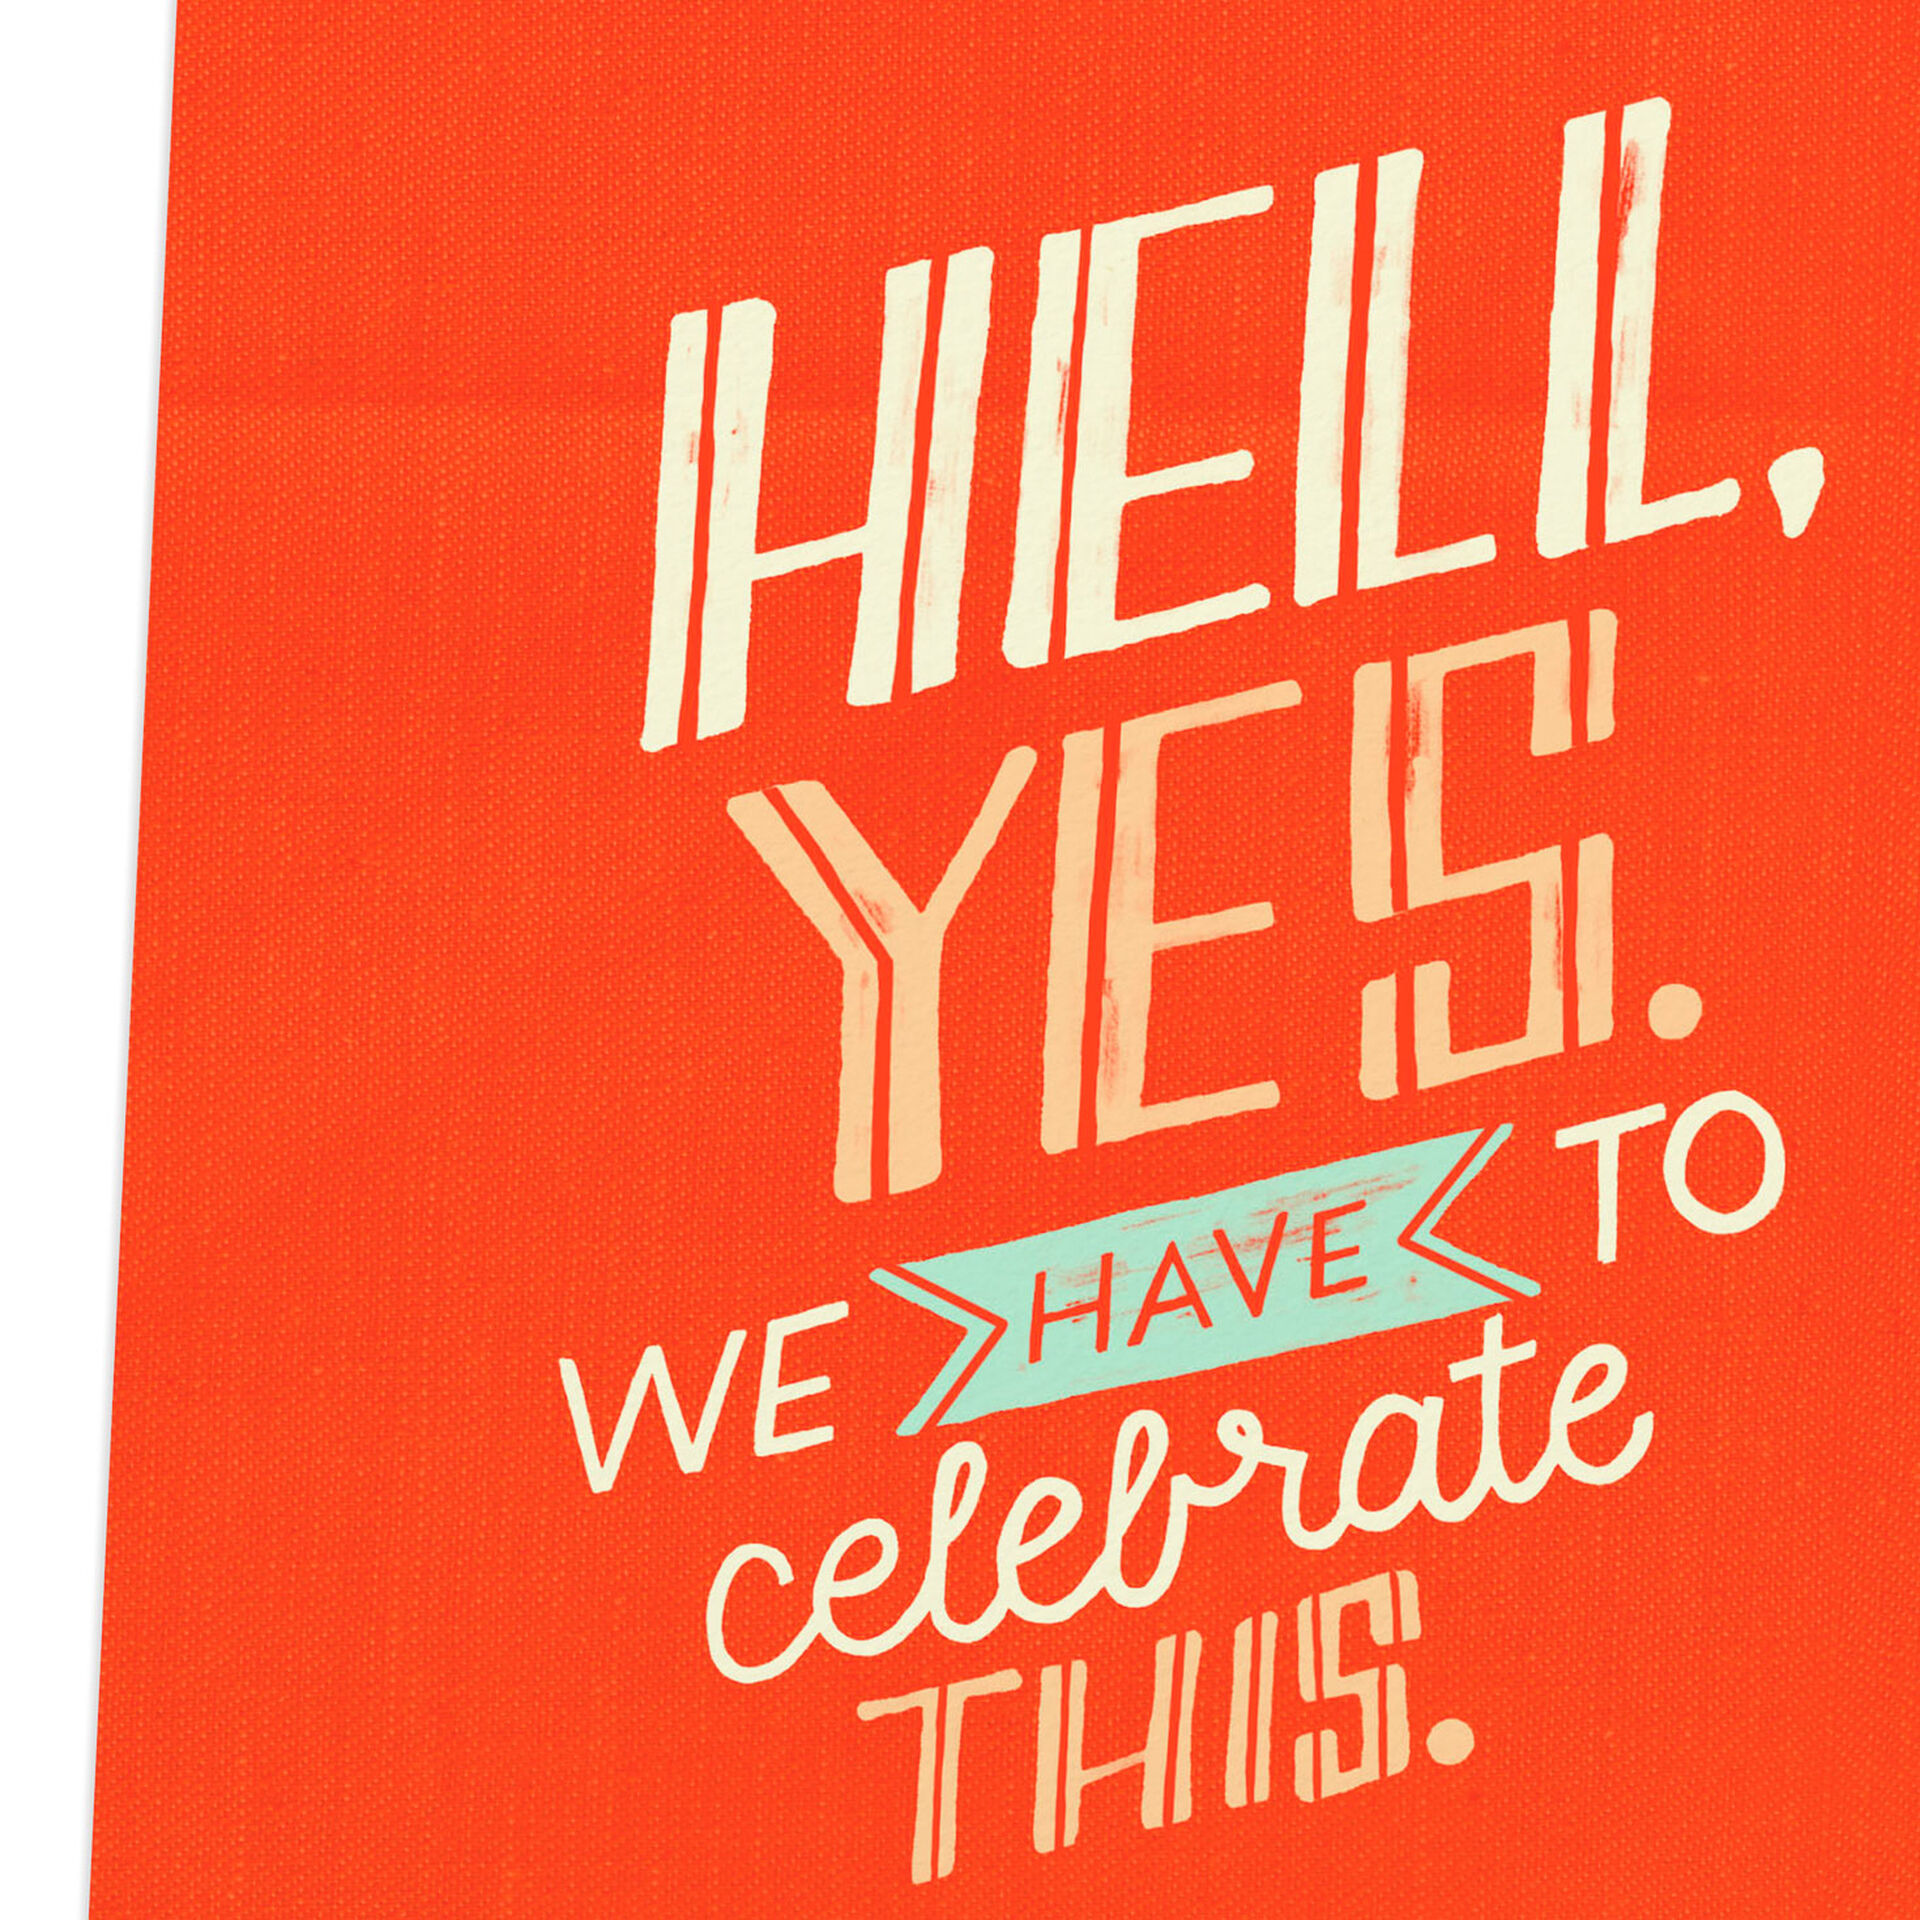 Hell-Yes-Blank-Congratulations-Card_299YYB1400_03